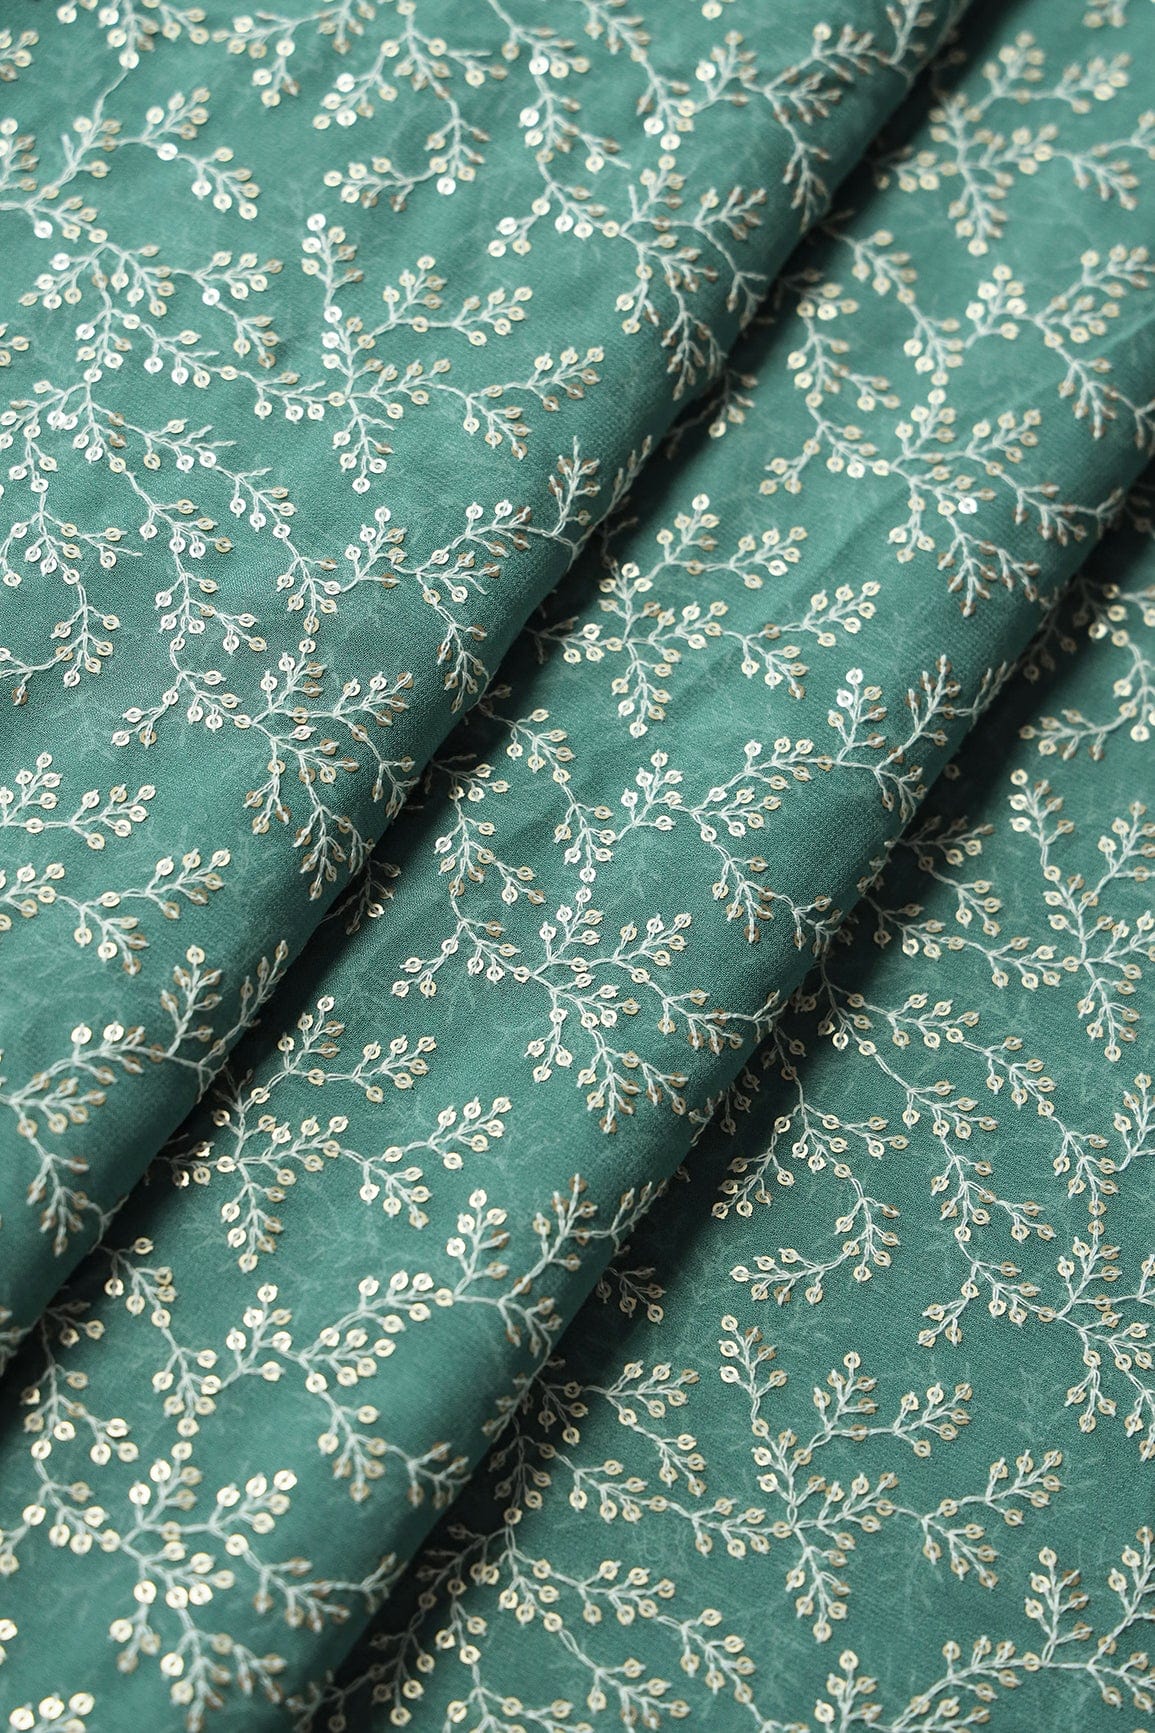 doeraa Plain Fabrics White Thread With Gold Sequins Leafy Embroidery Work On Teal Viscose Georgette Fabric